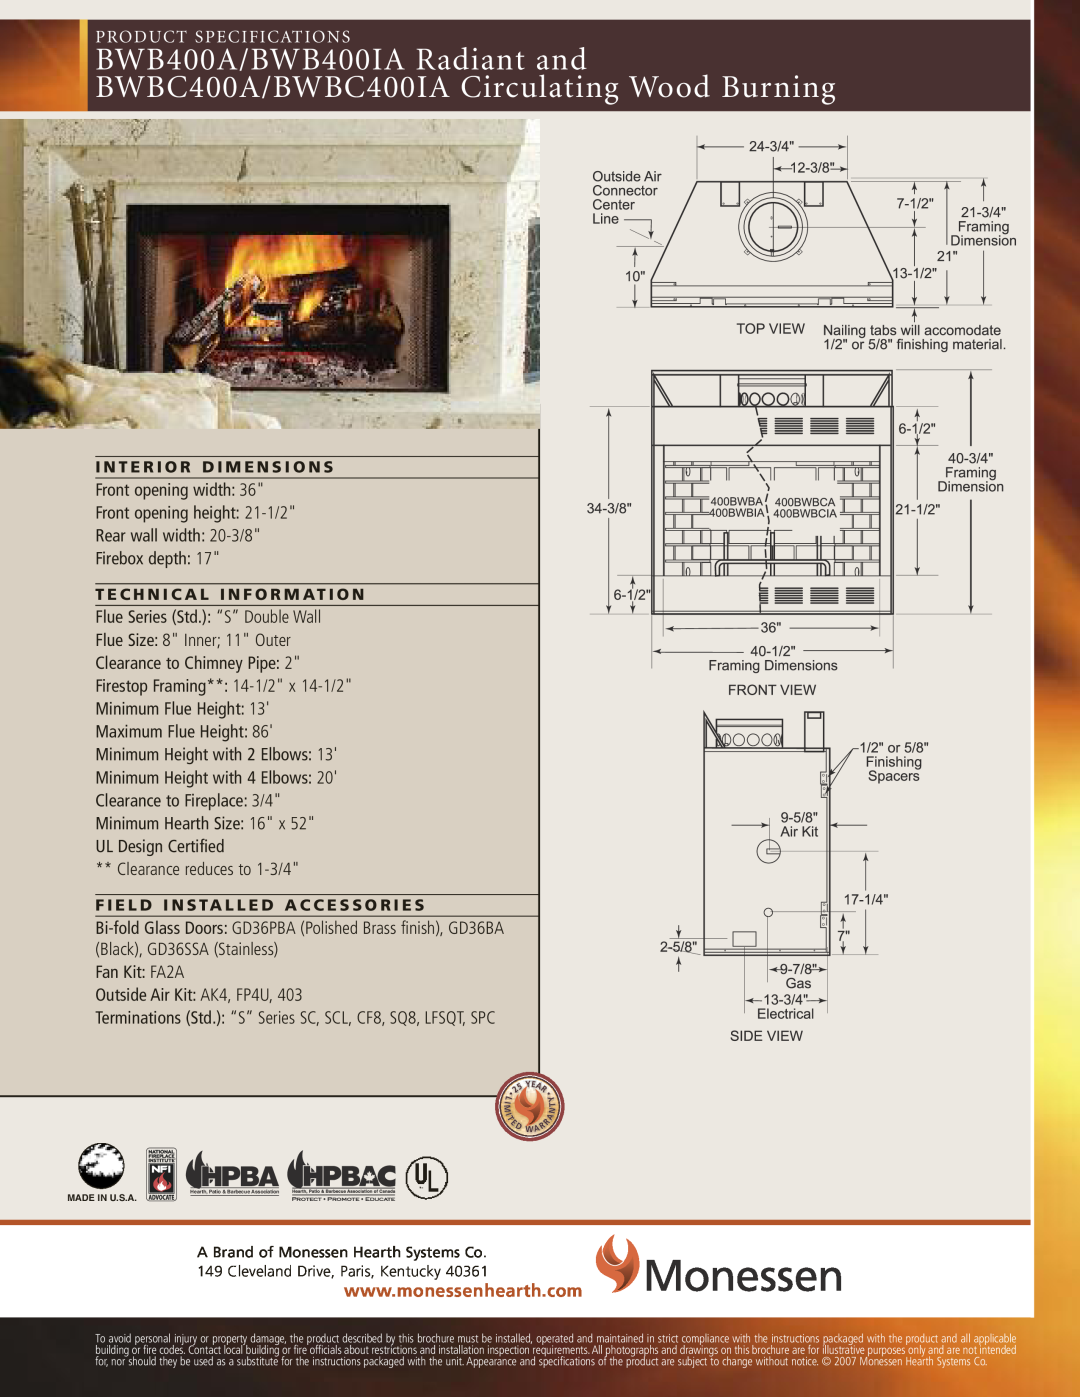 Monessen Hearth BWB400A, BWB400IA, BWBC400IA specifications Hpba, Product Specifications, Flue Size 8 Inner 11 Outer 